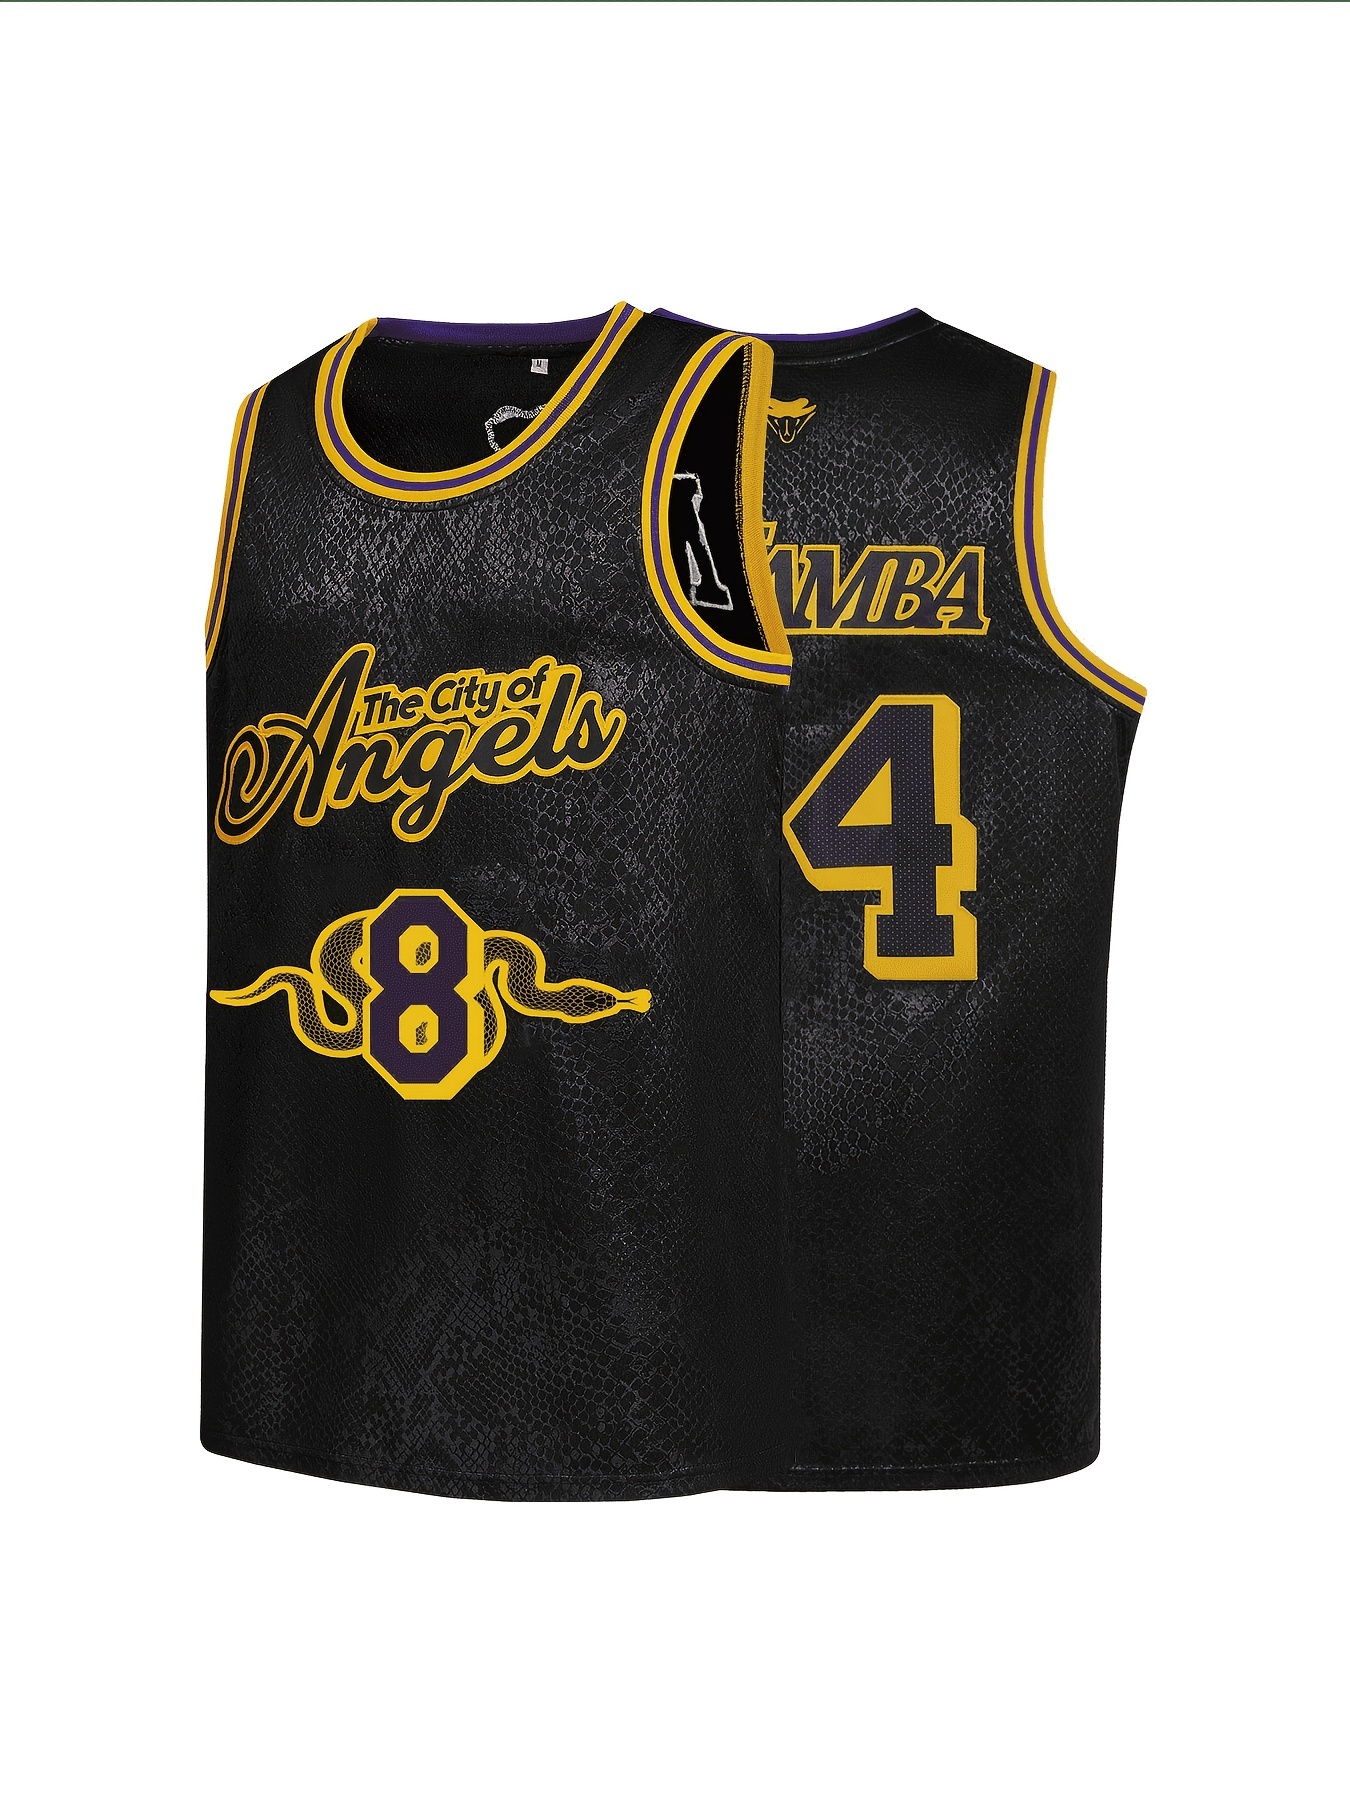 Women's Los Angeles Lakers Gold & Split Dress Jersey - All Stitched